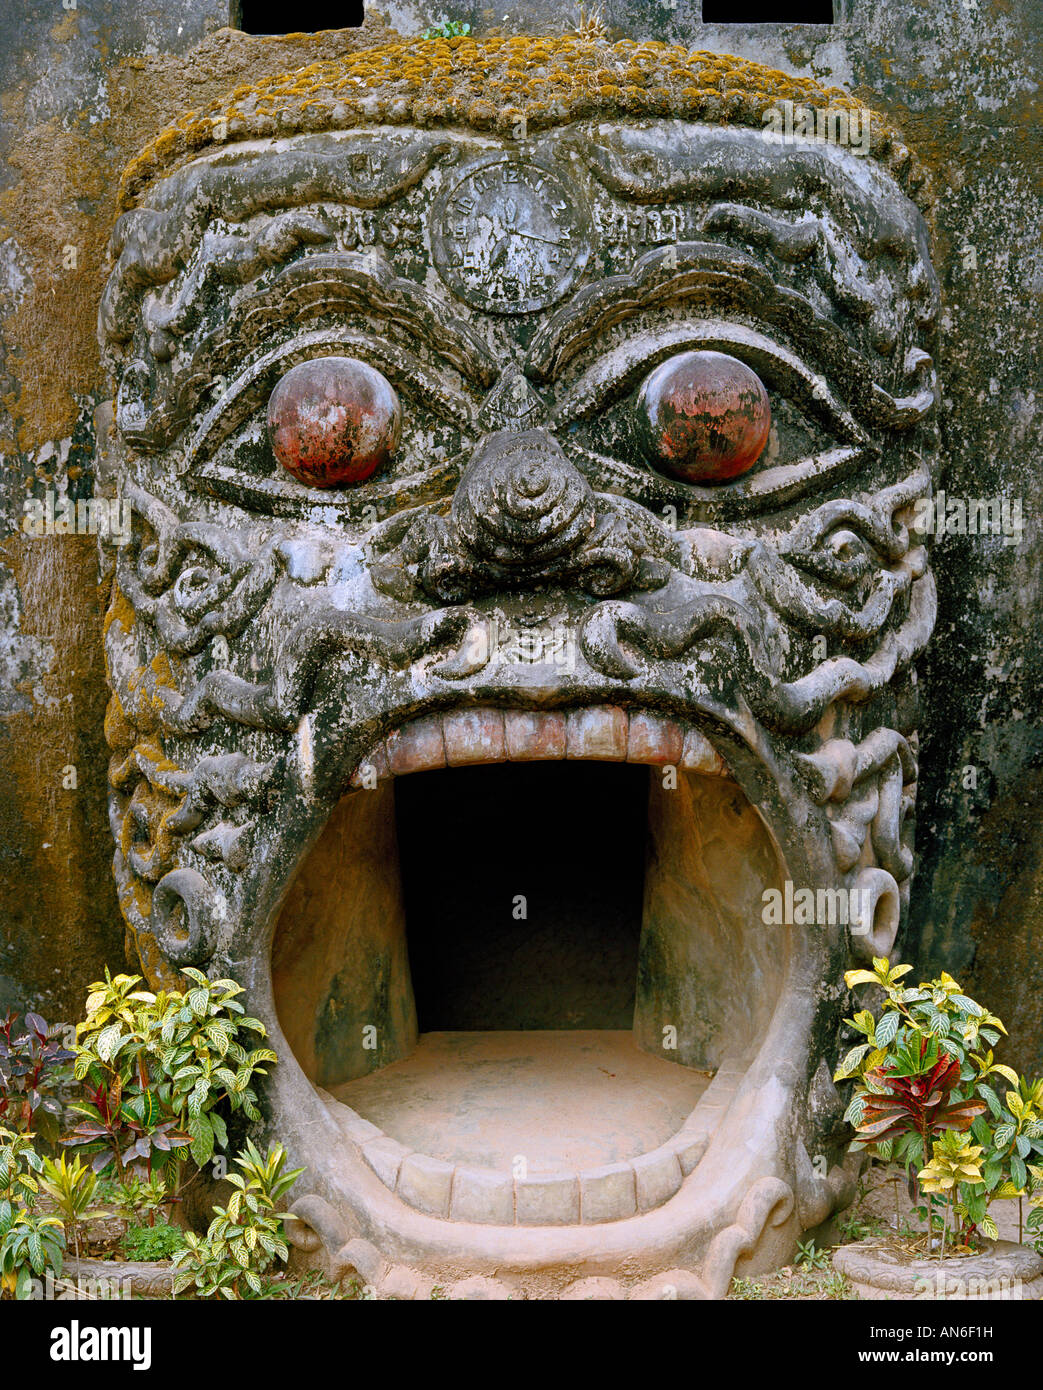 Entrance into the „pumpkin“ through the open mouth of a njak with a clock on his forehead Stock Photo